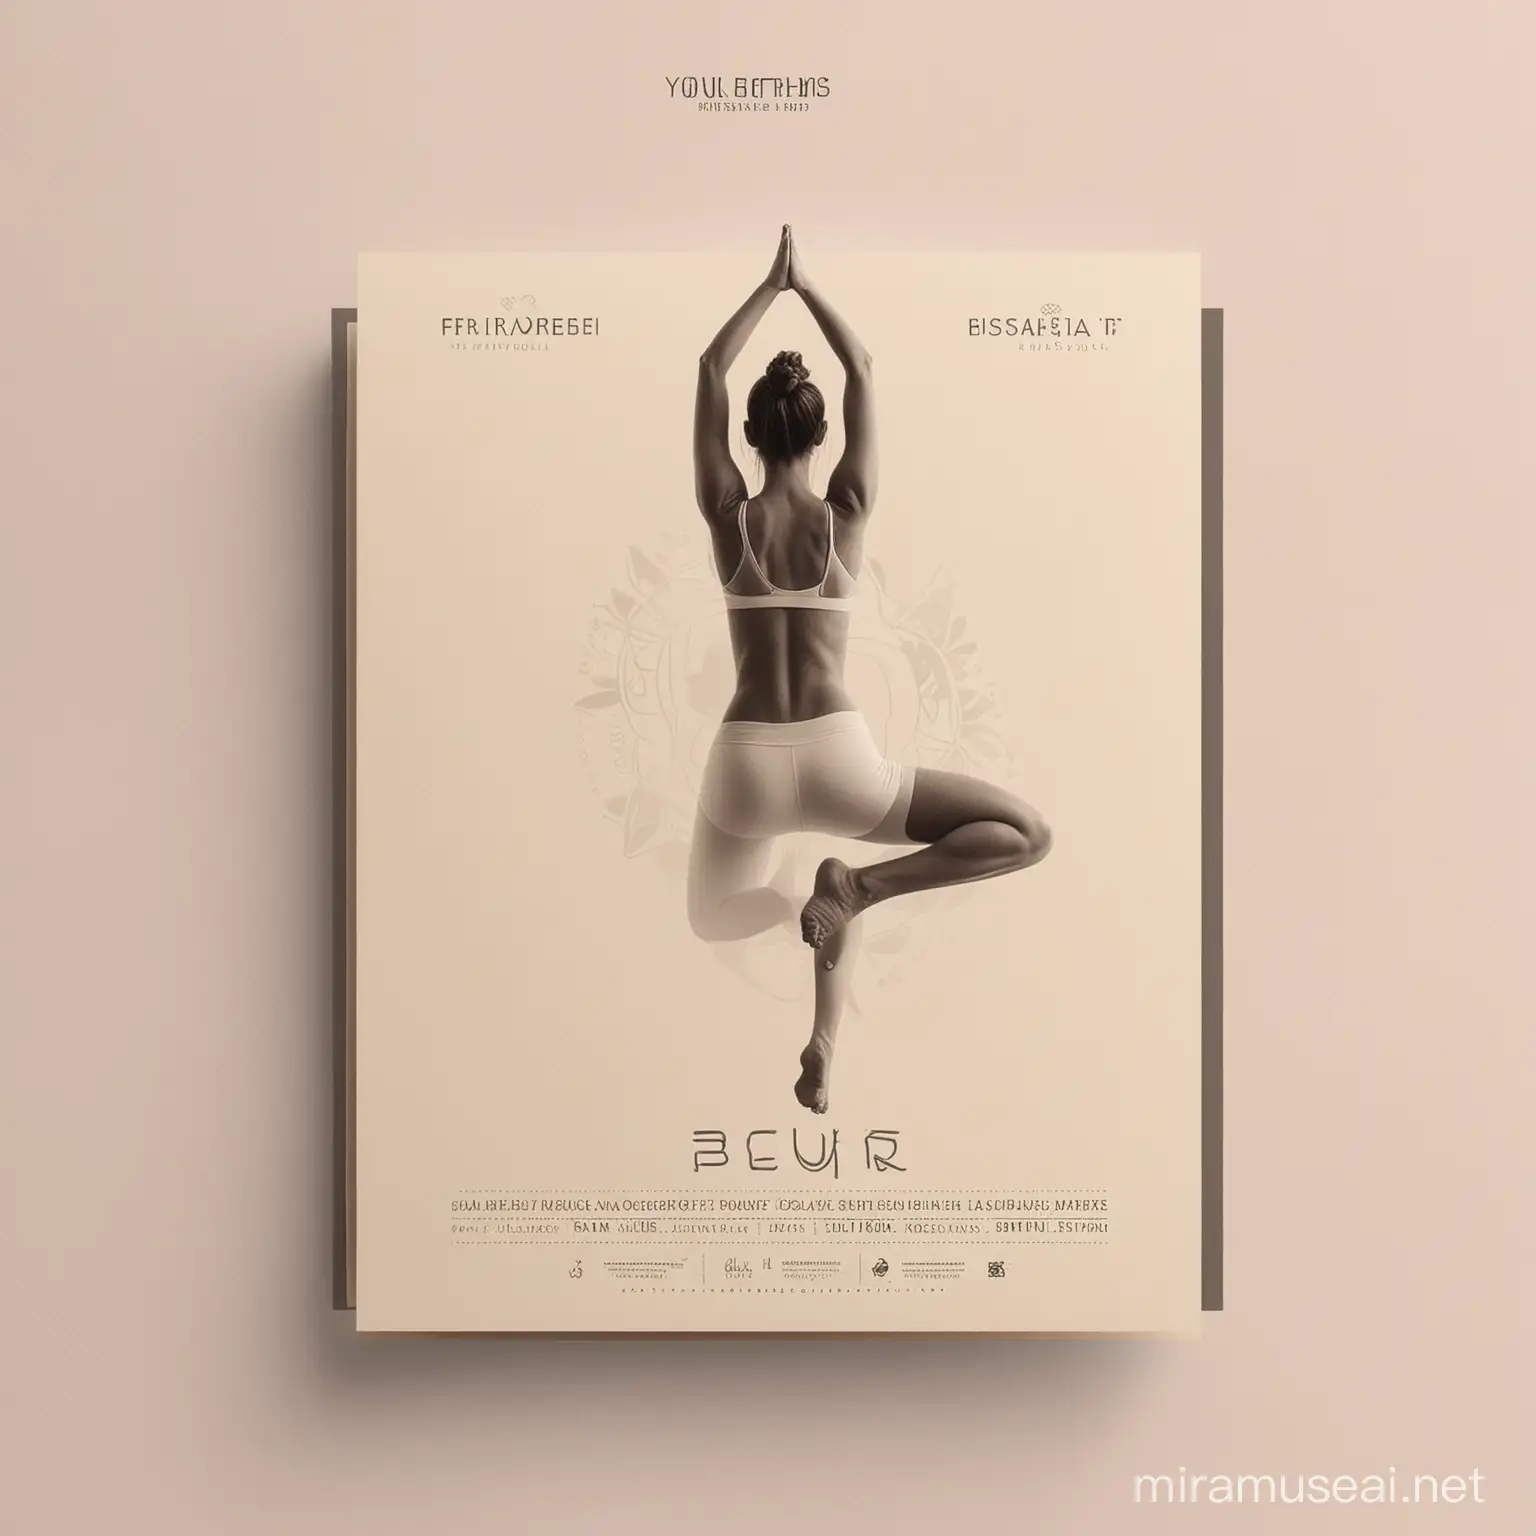 Minimalist Yoga Flyer with Serene Woman Practicing Poses